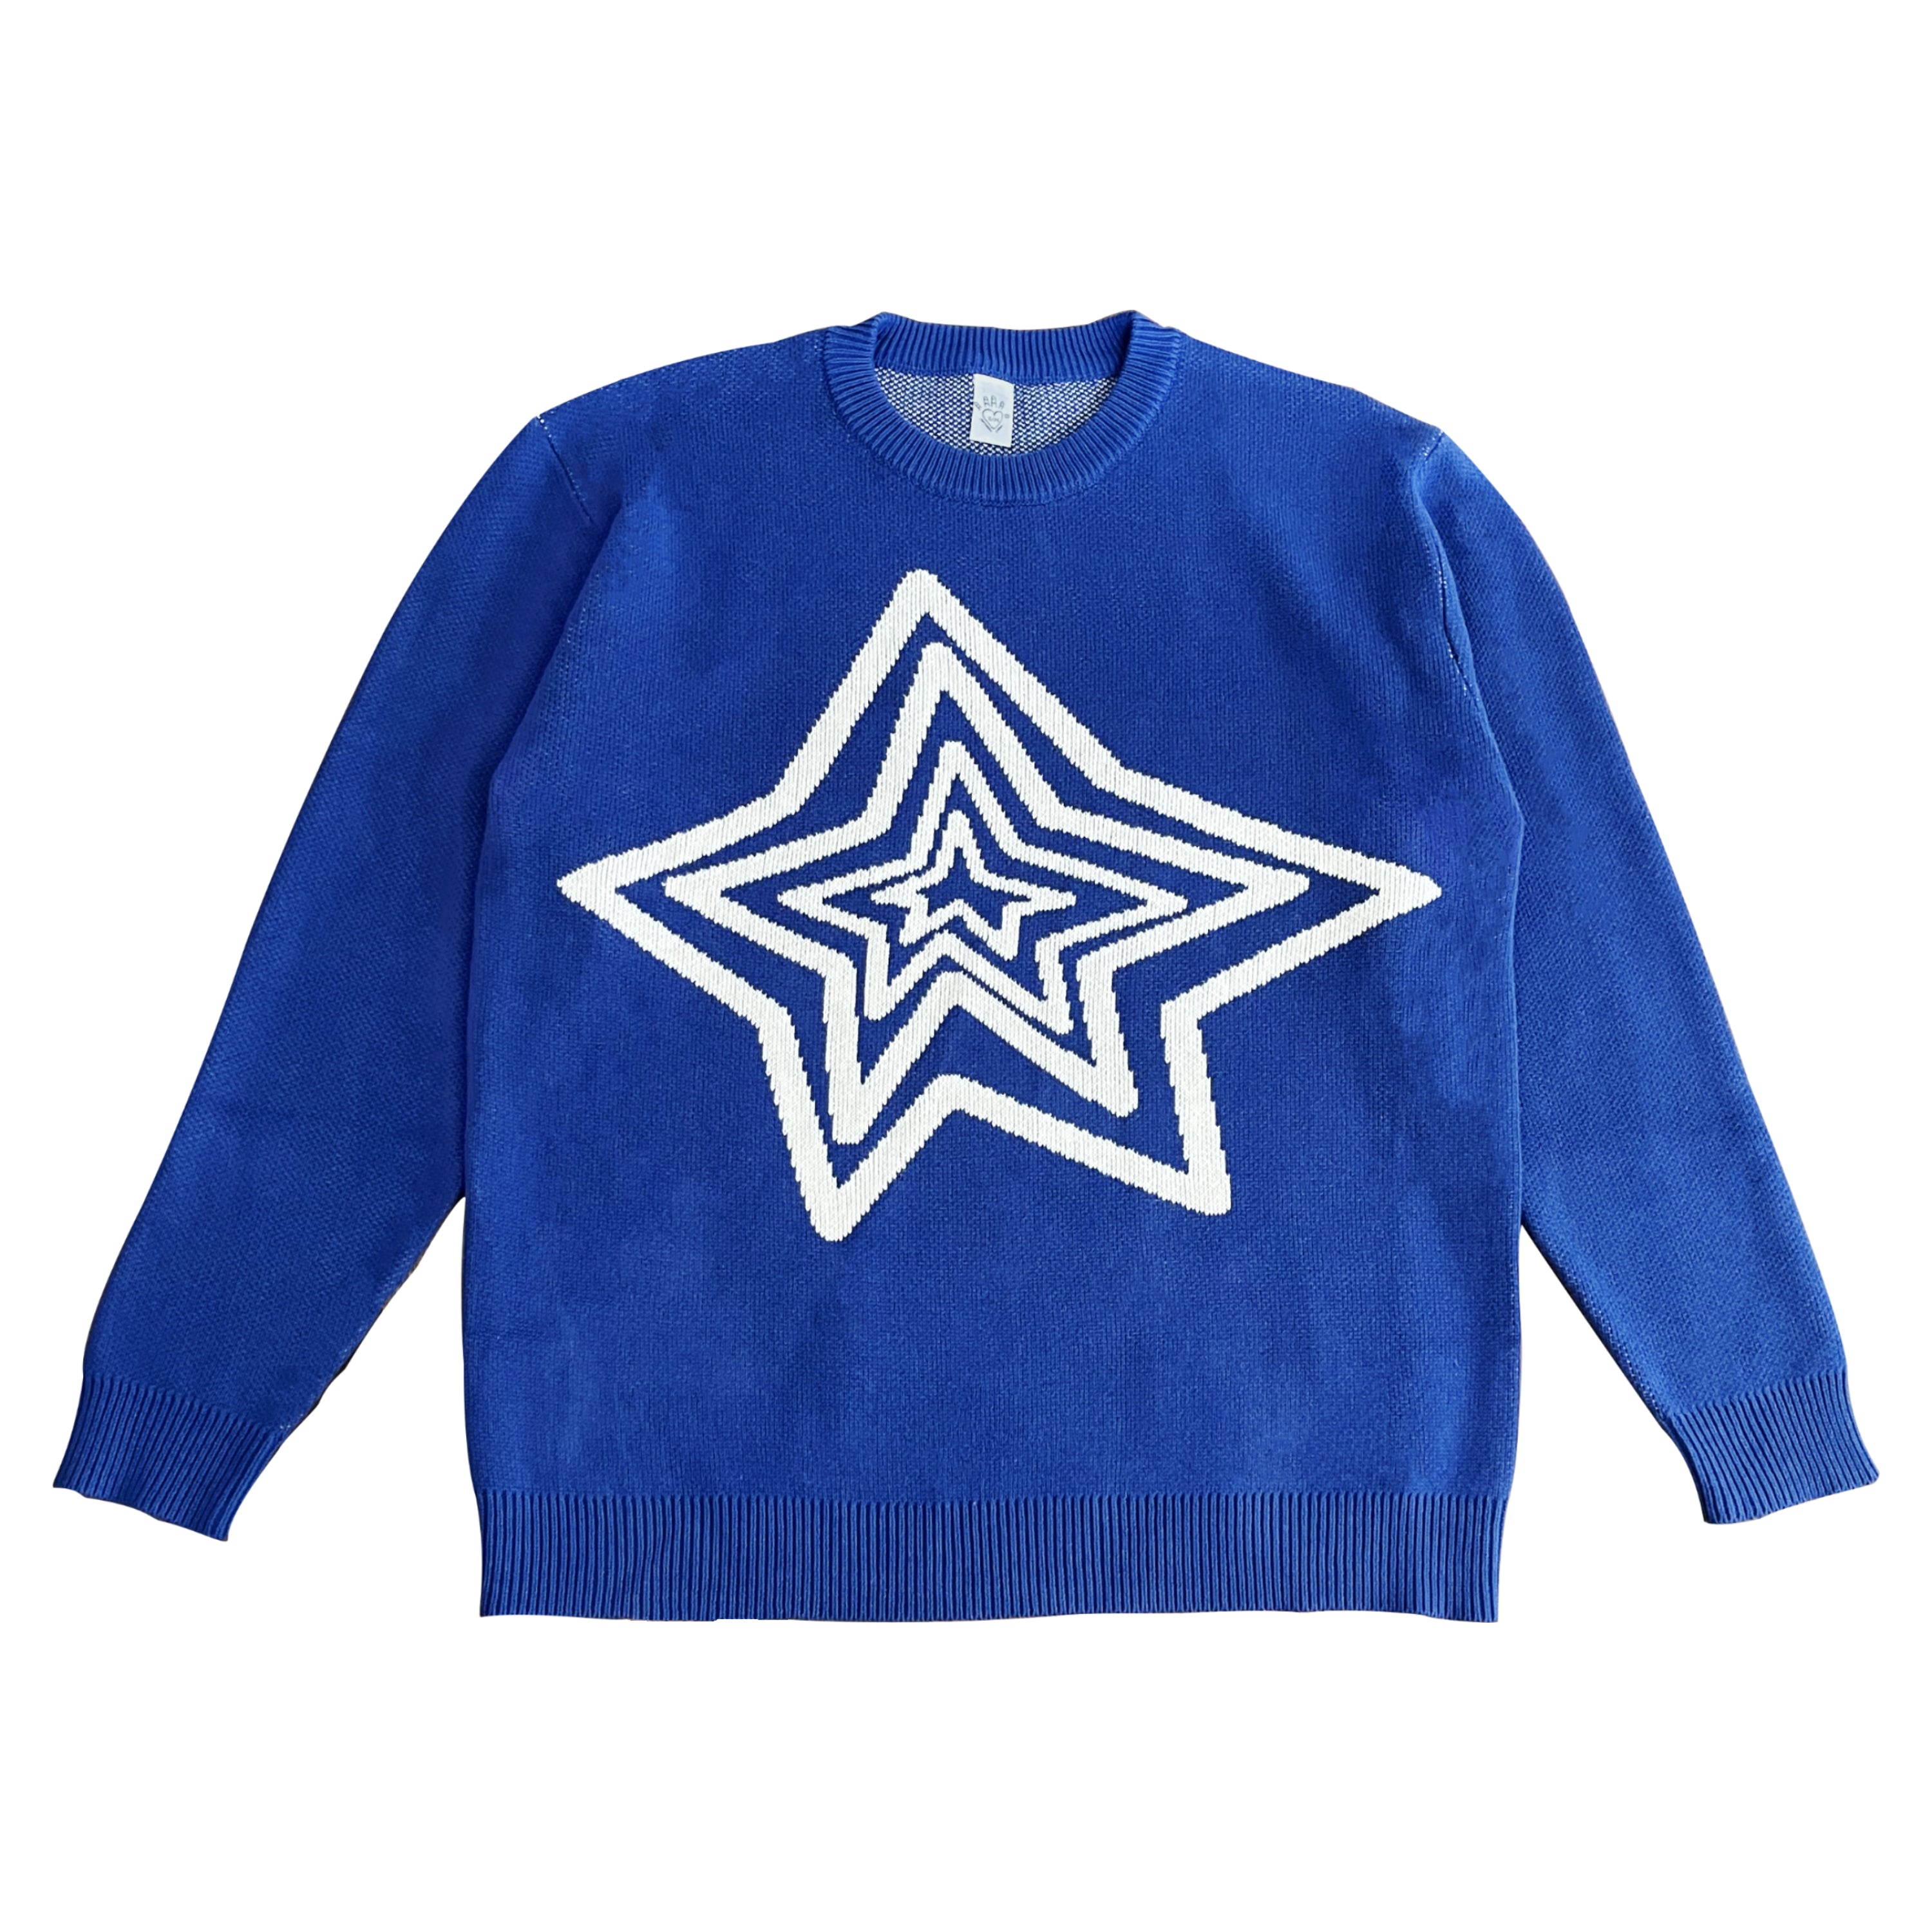 Square Neck Sweater - Heavenly Blue